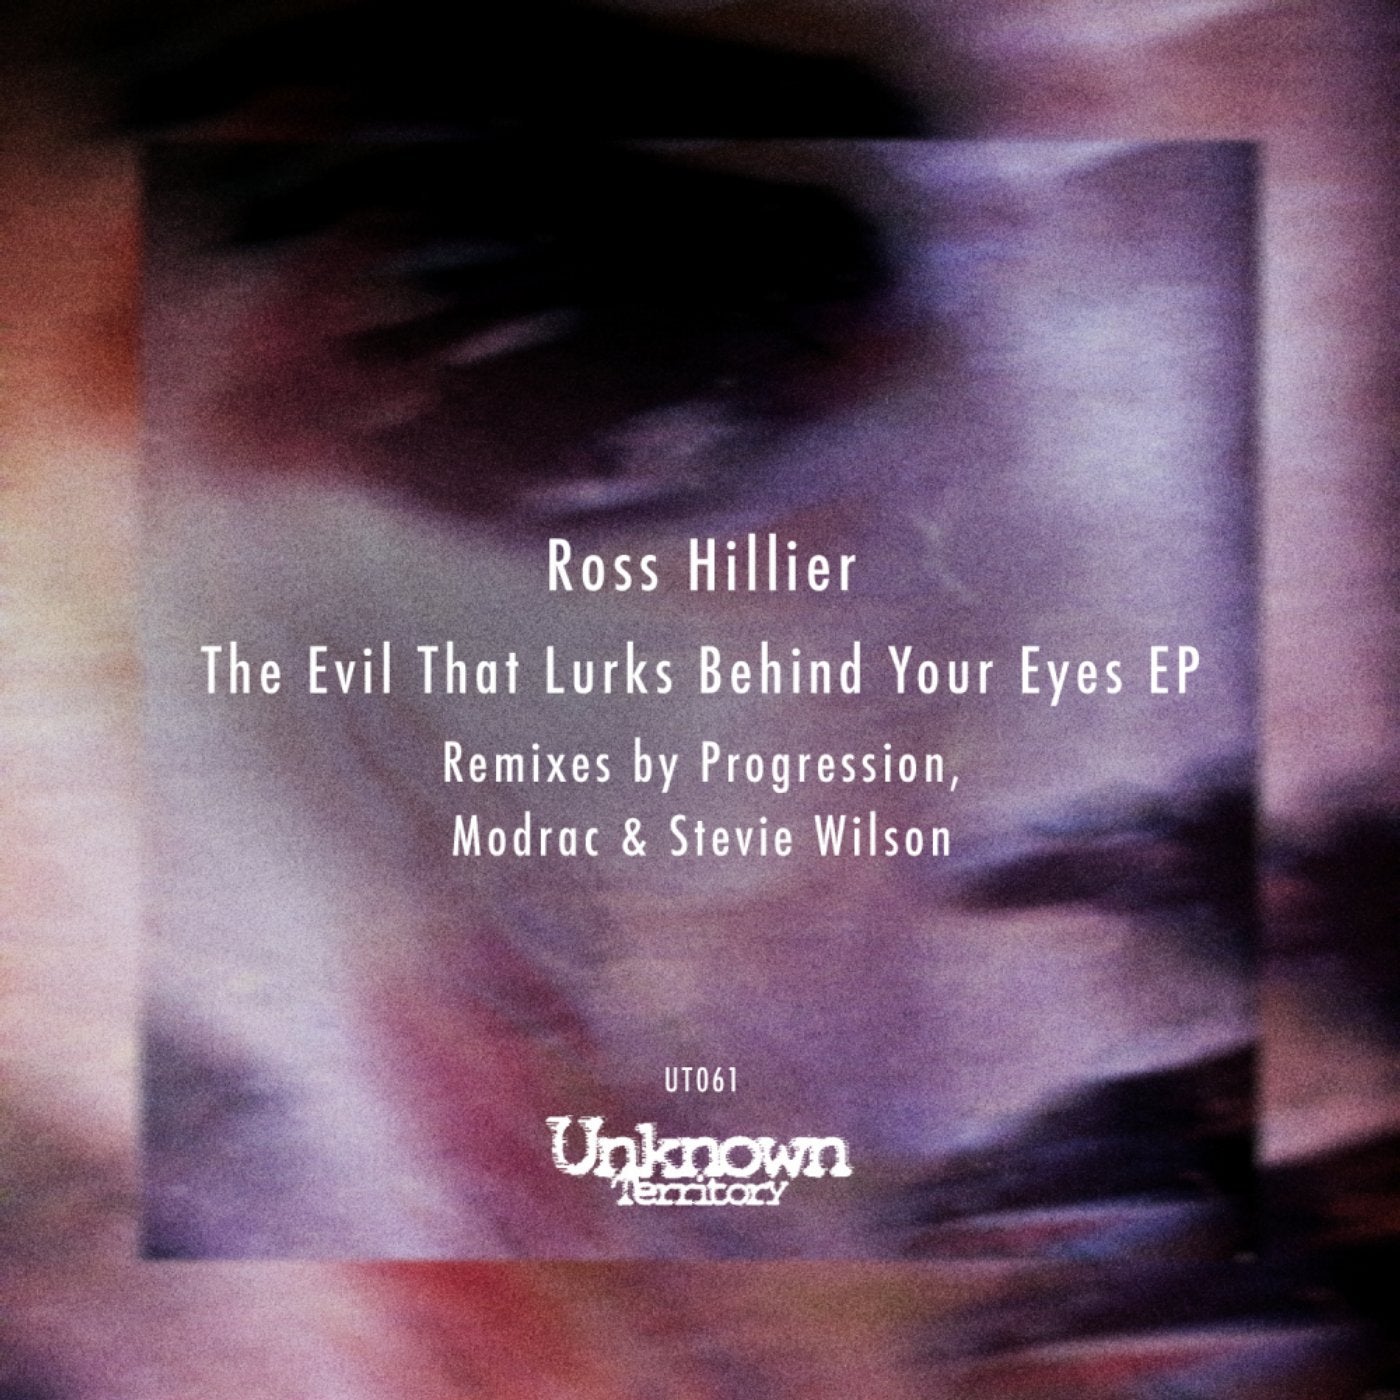 The Evil That Lurks Behind Your Eyes EP